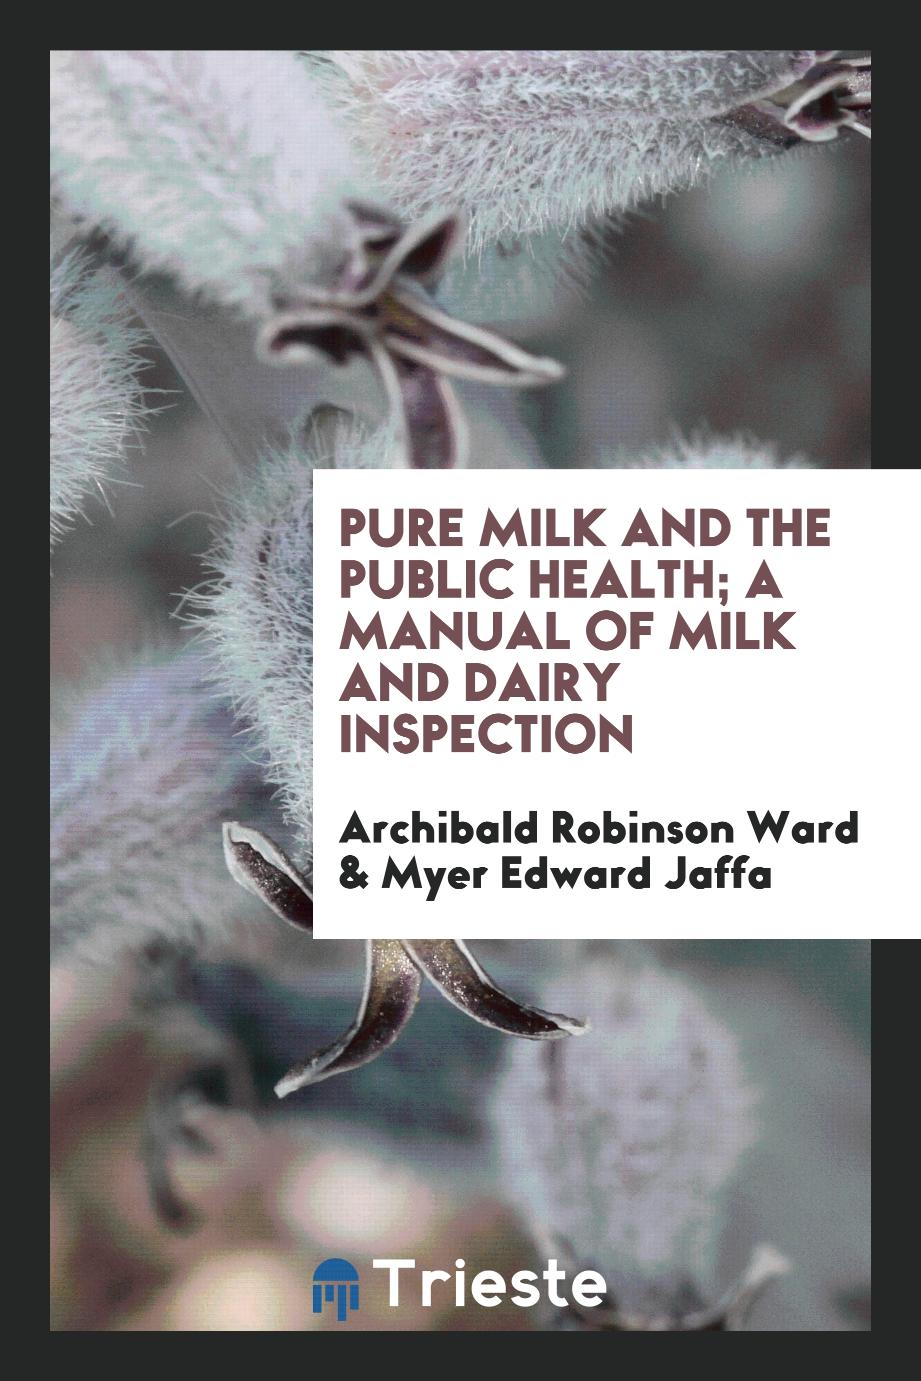 Pure milk and the public health; a manual of milk and dairy inspection